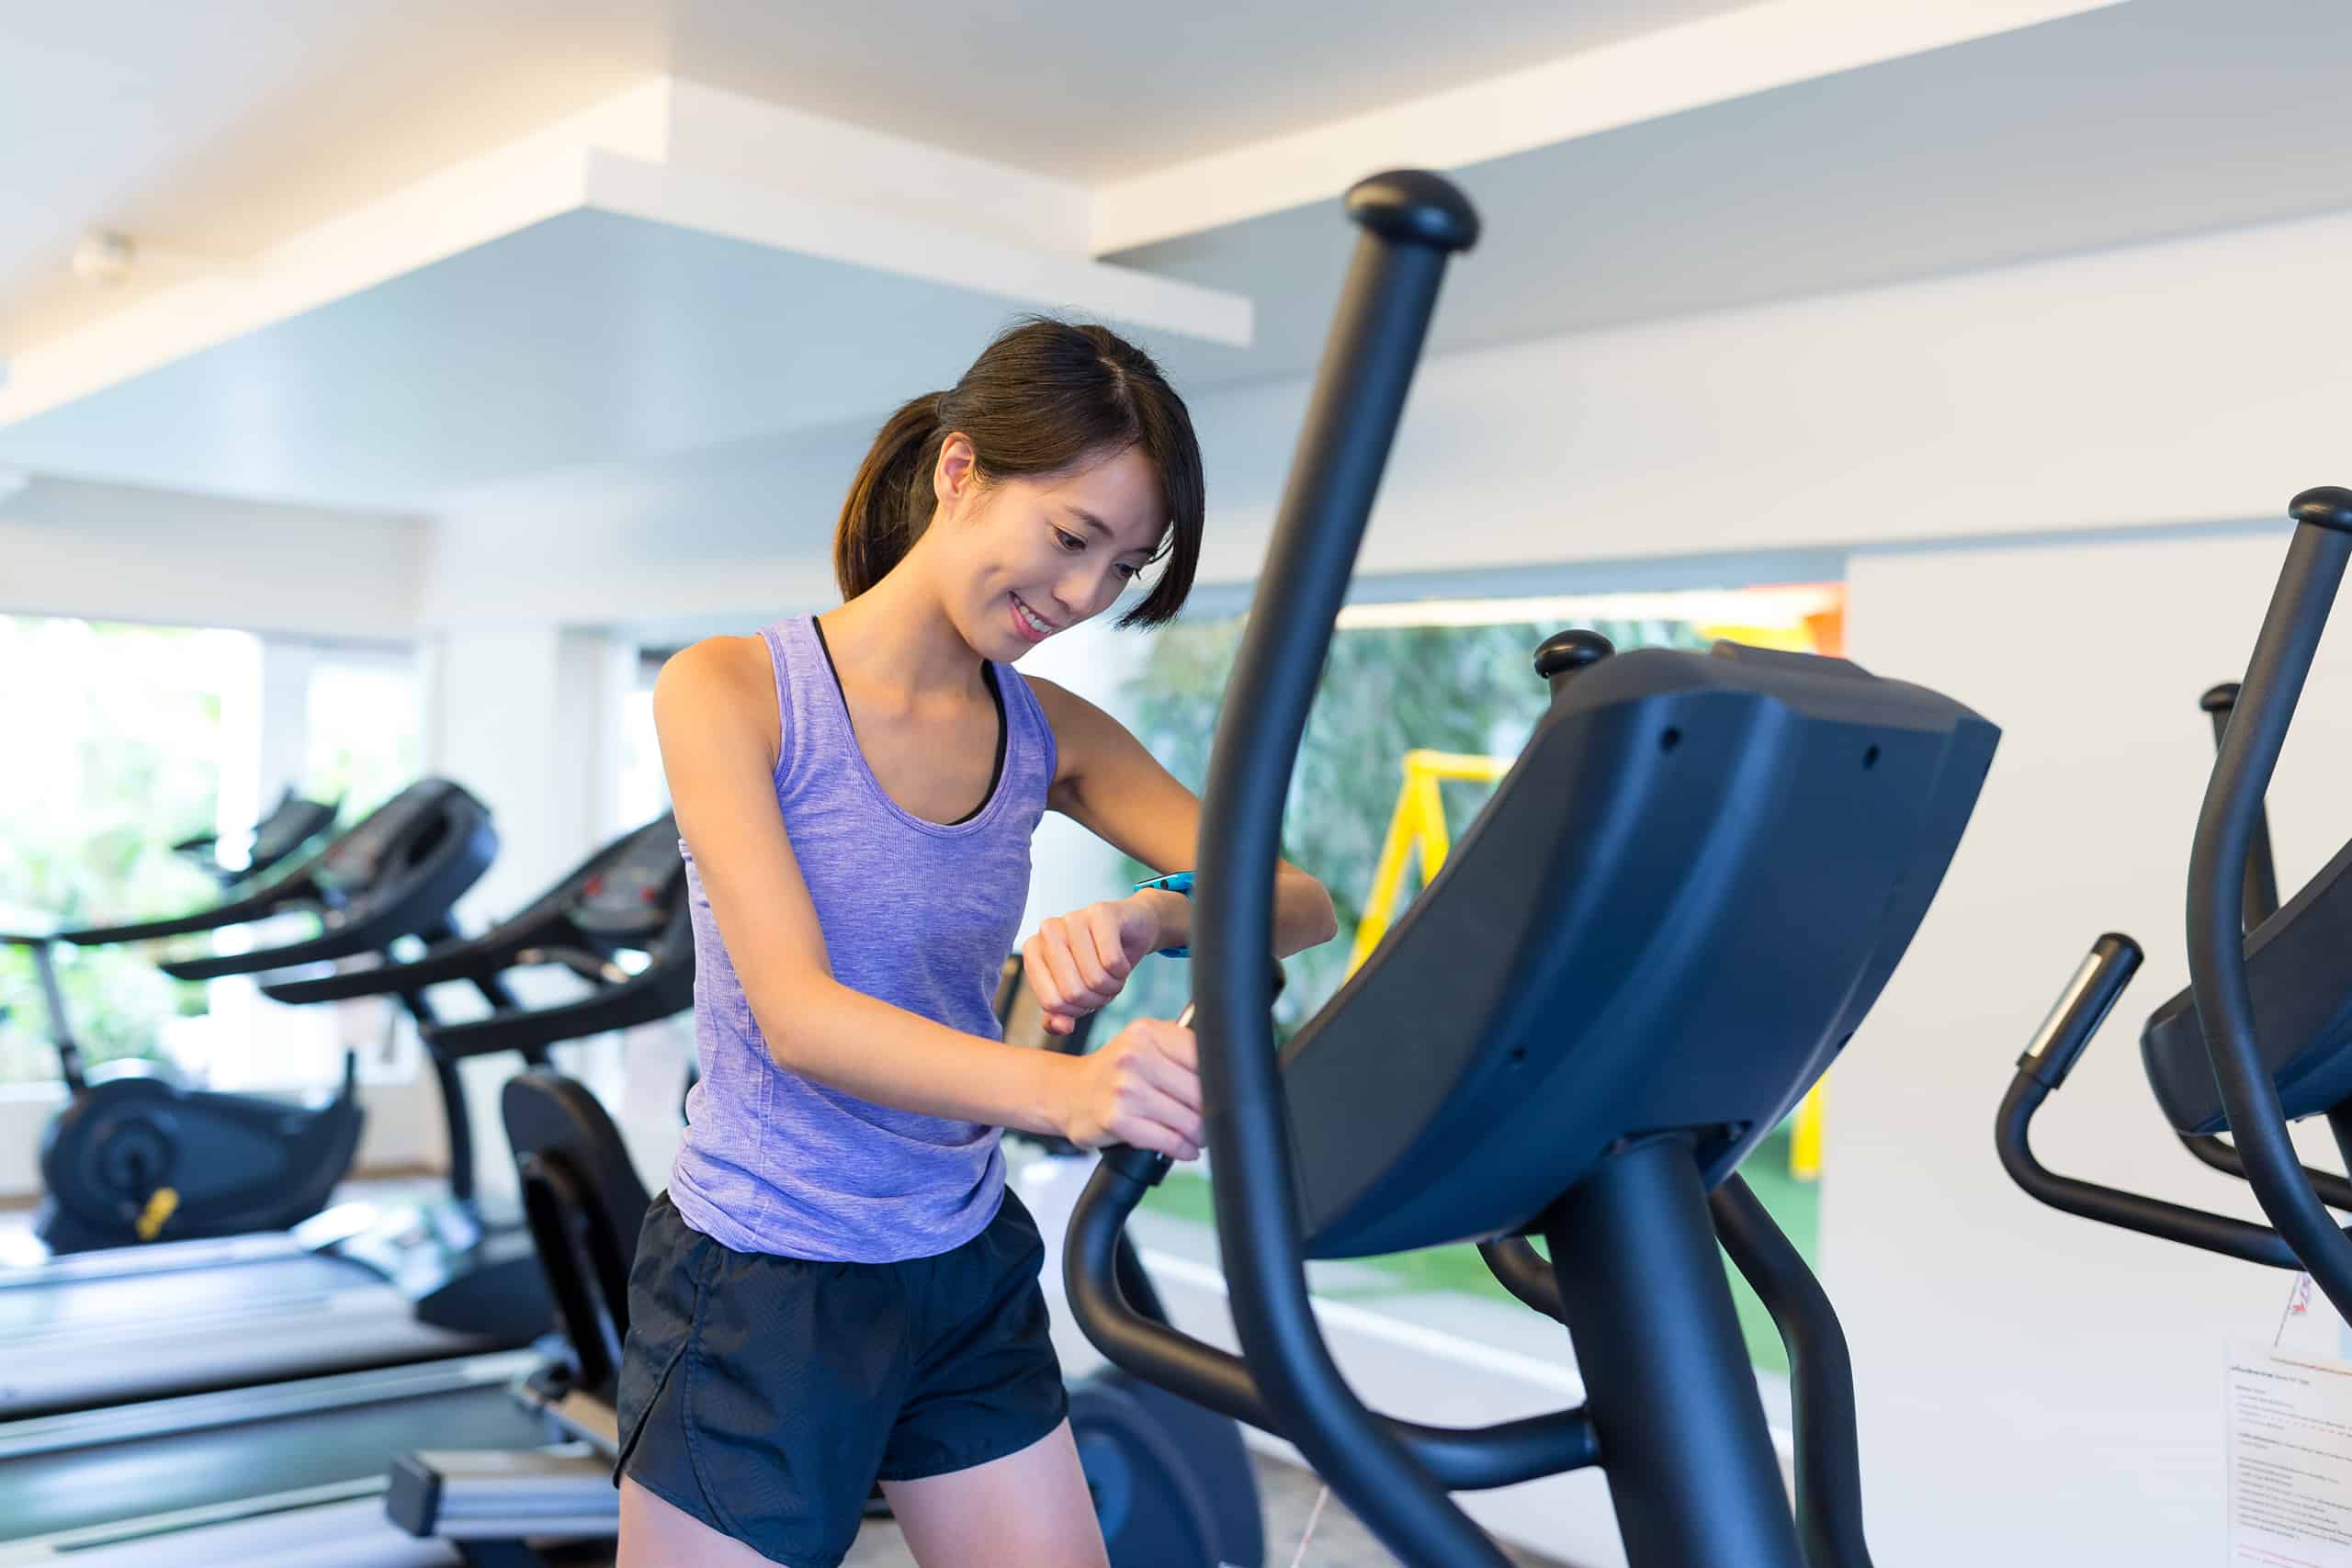 Transform Your Back Health with Elliptical Exercises